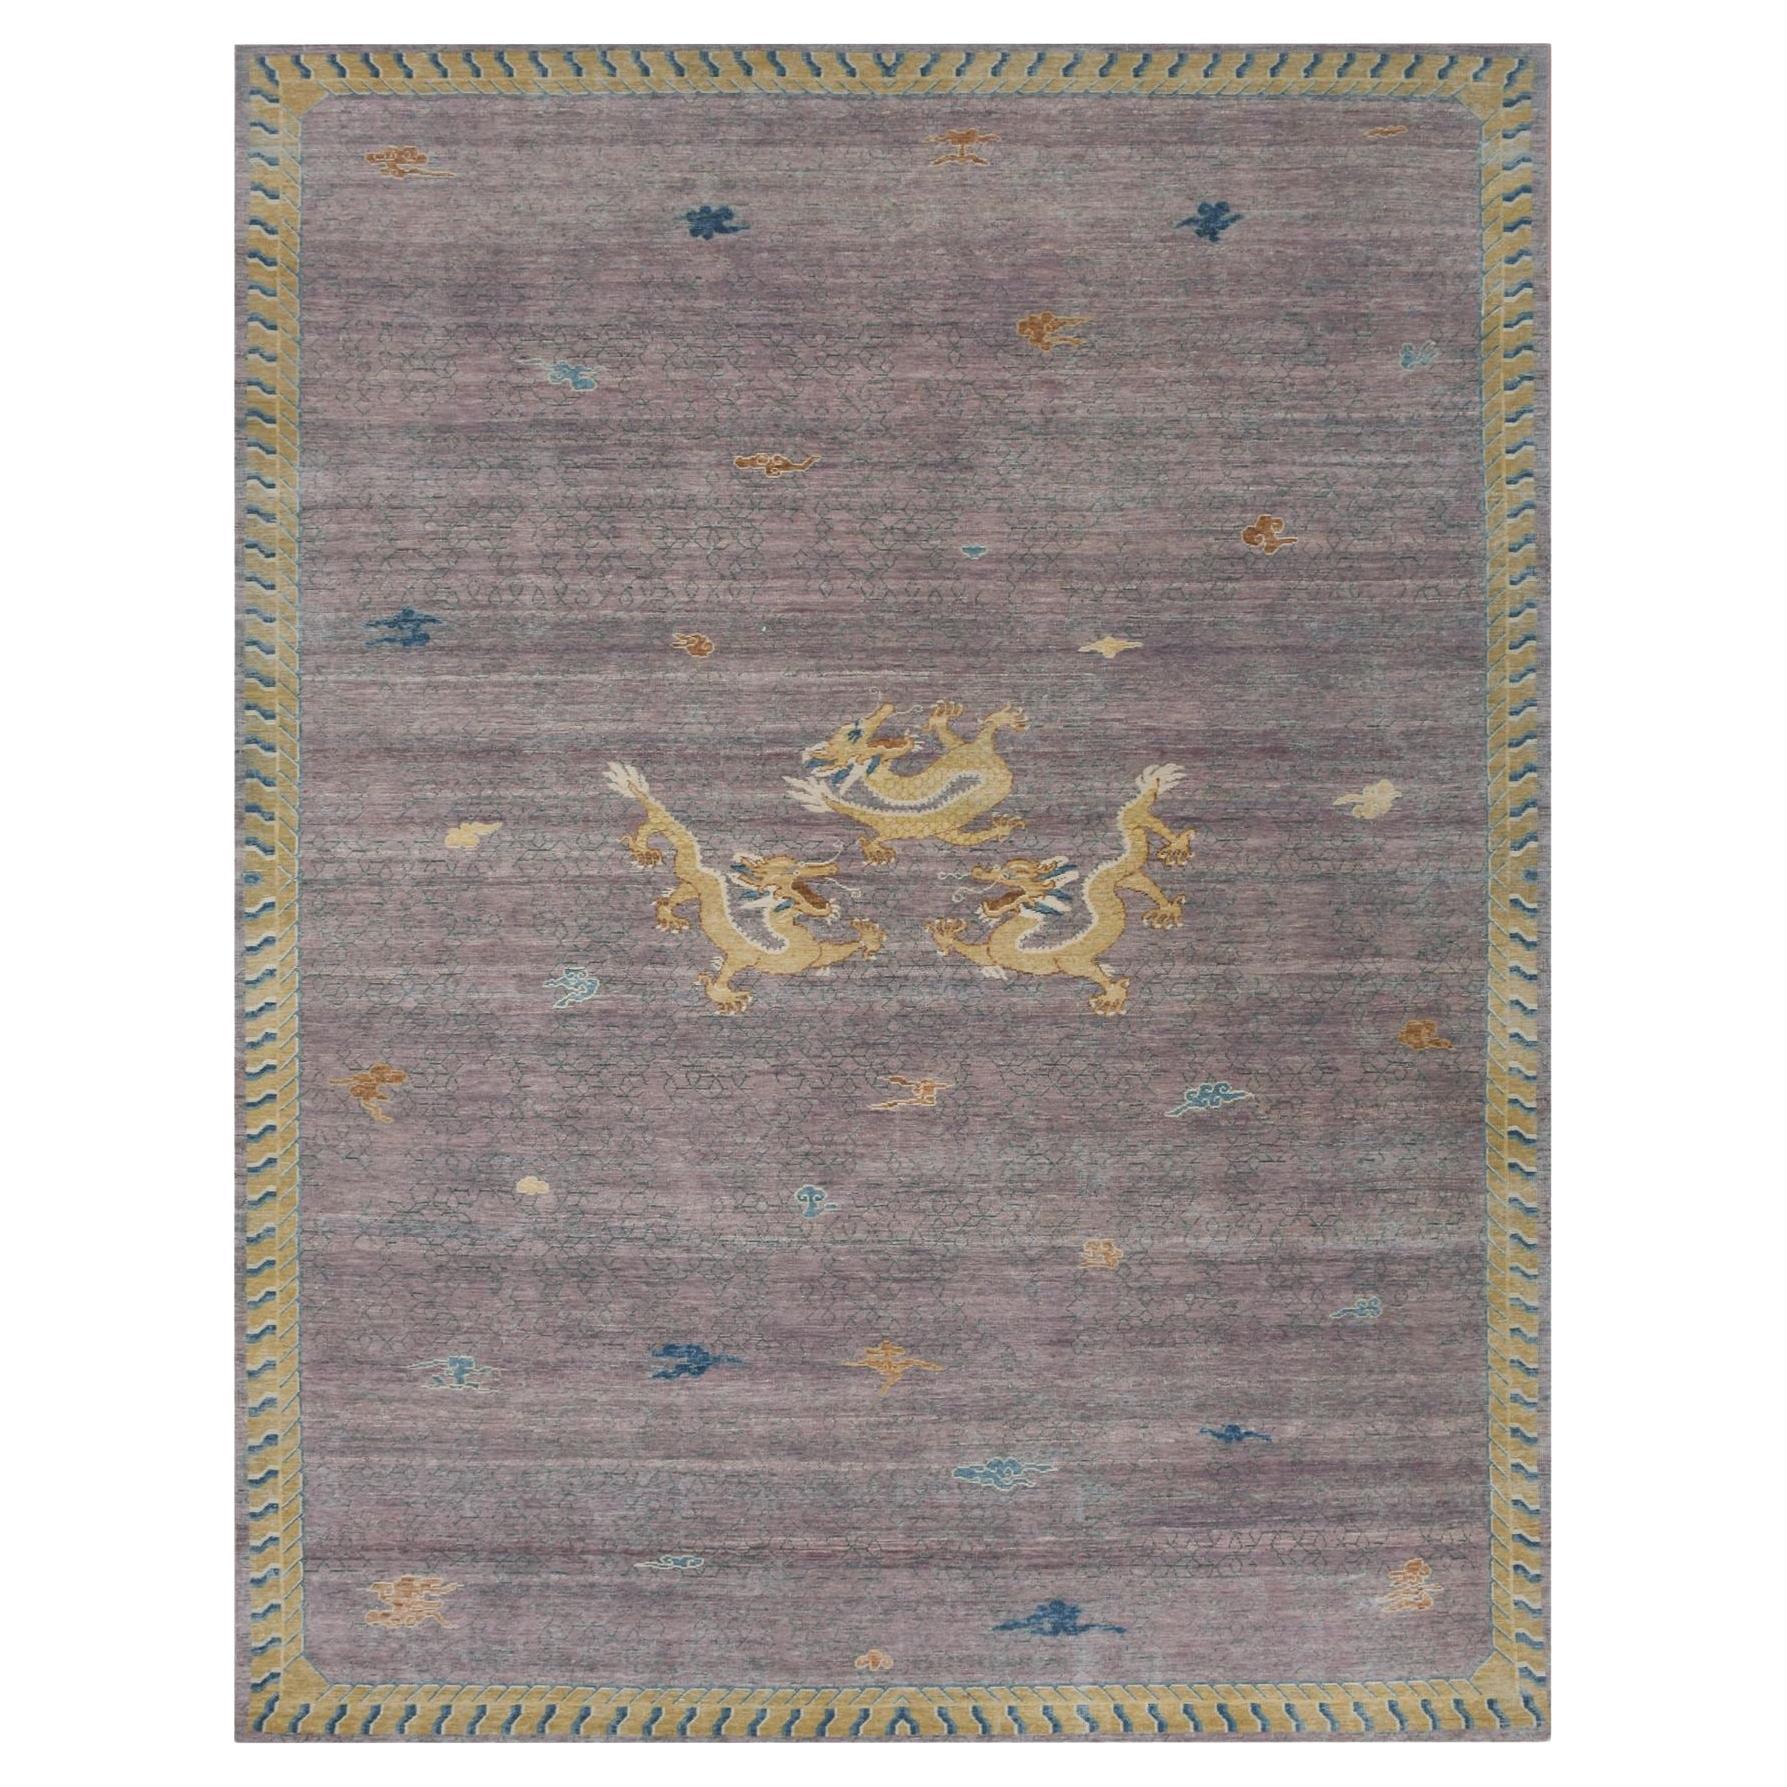 Purple Antique Chinese Inspired Dragon Design Wool Hand Knotted Rug 9'x12'1" For Sale